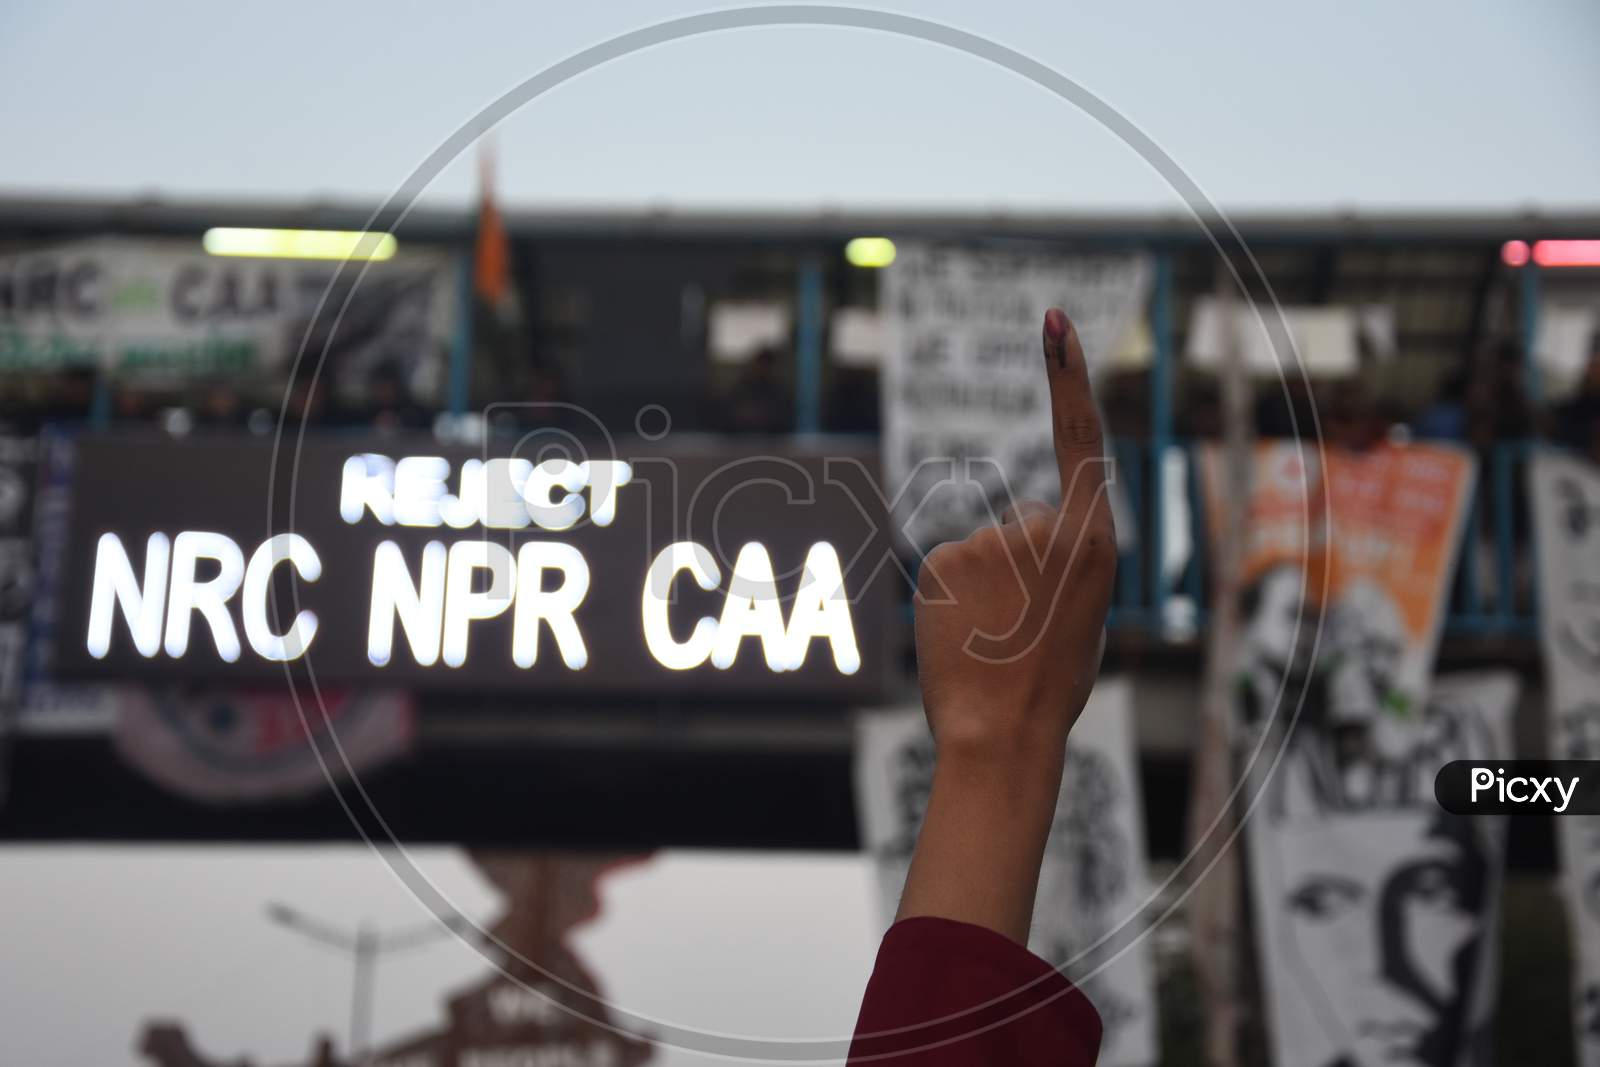 Indian Students Participating in an Protest Against CAA, CAB, NPRand NRC Amendment Bill In Delhi